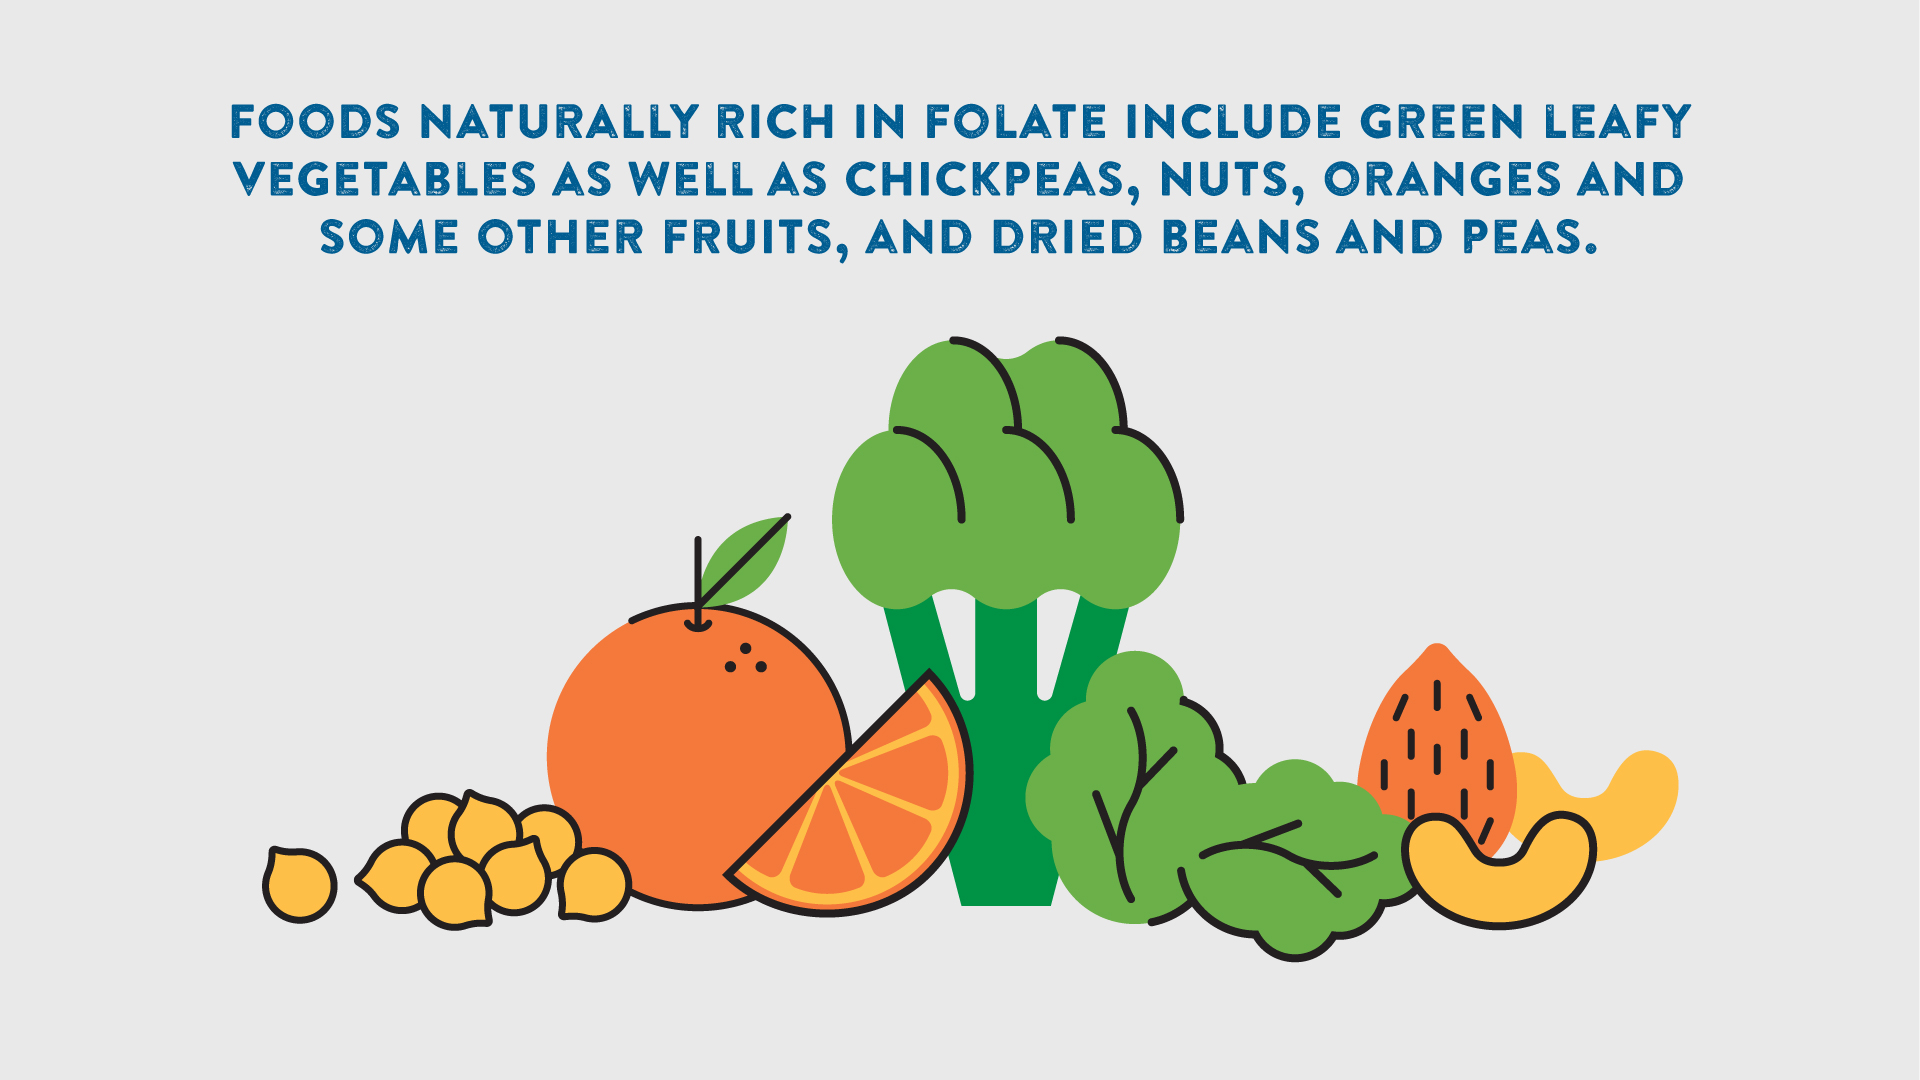 Folate rich foods include green leafy vegetables, chickpeas, nuts, oranges and dried beans